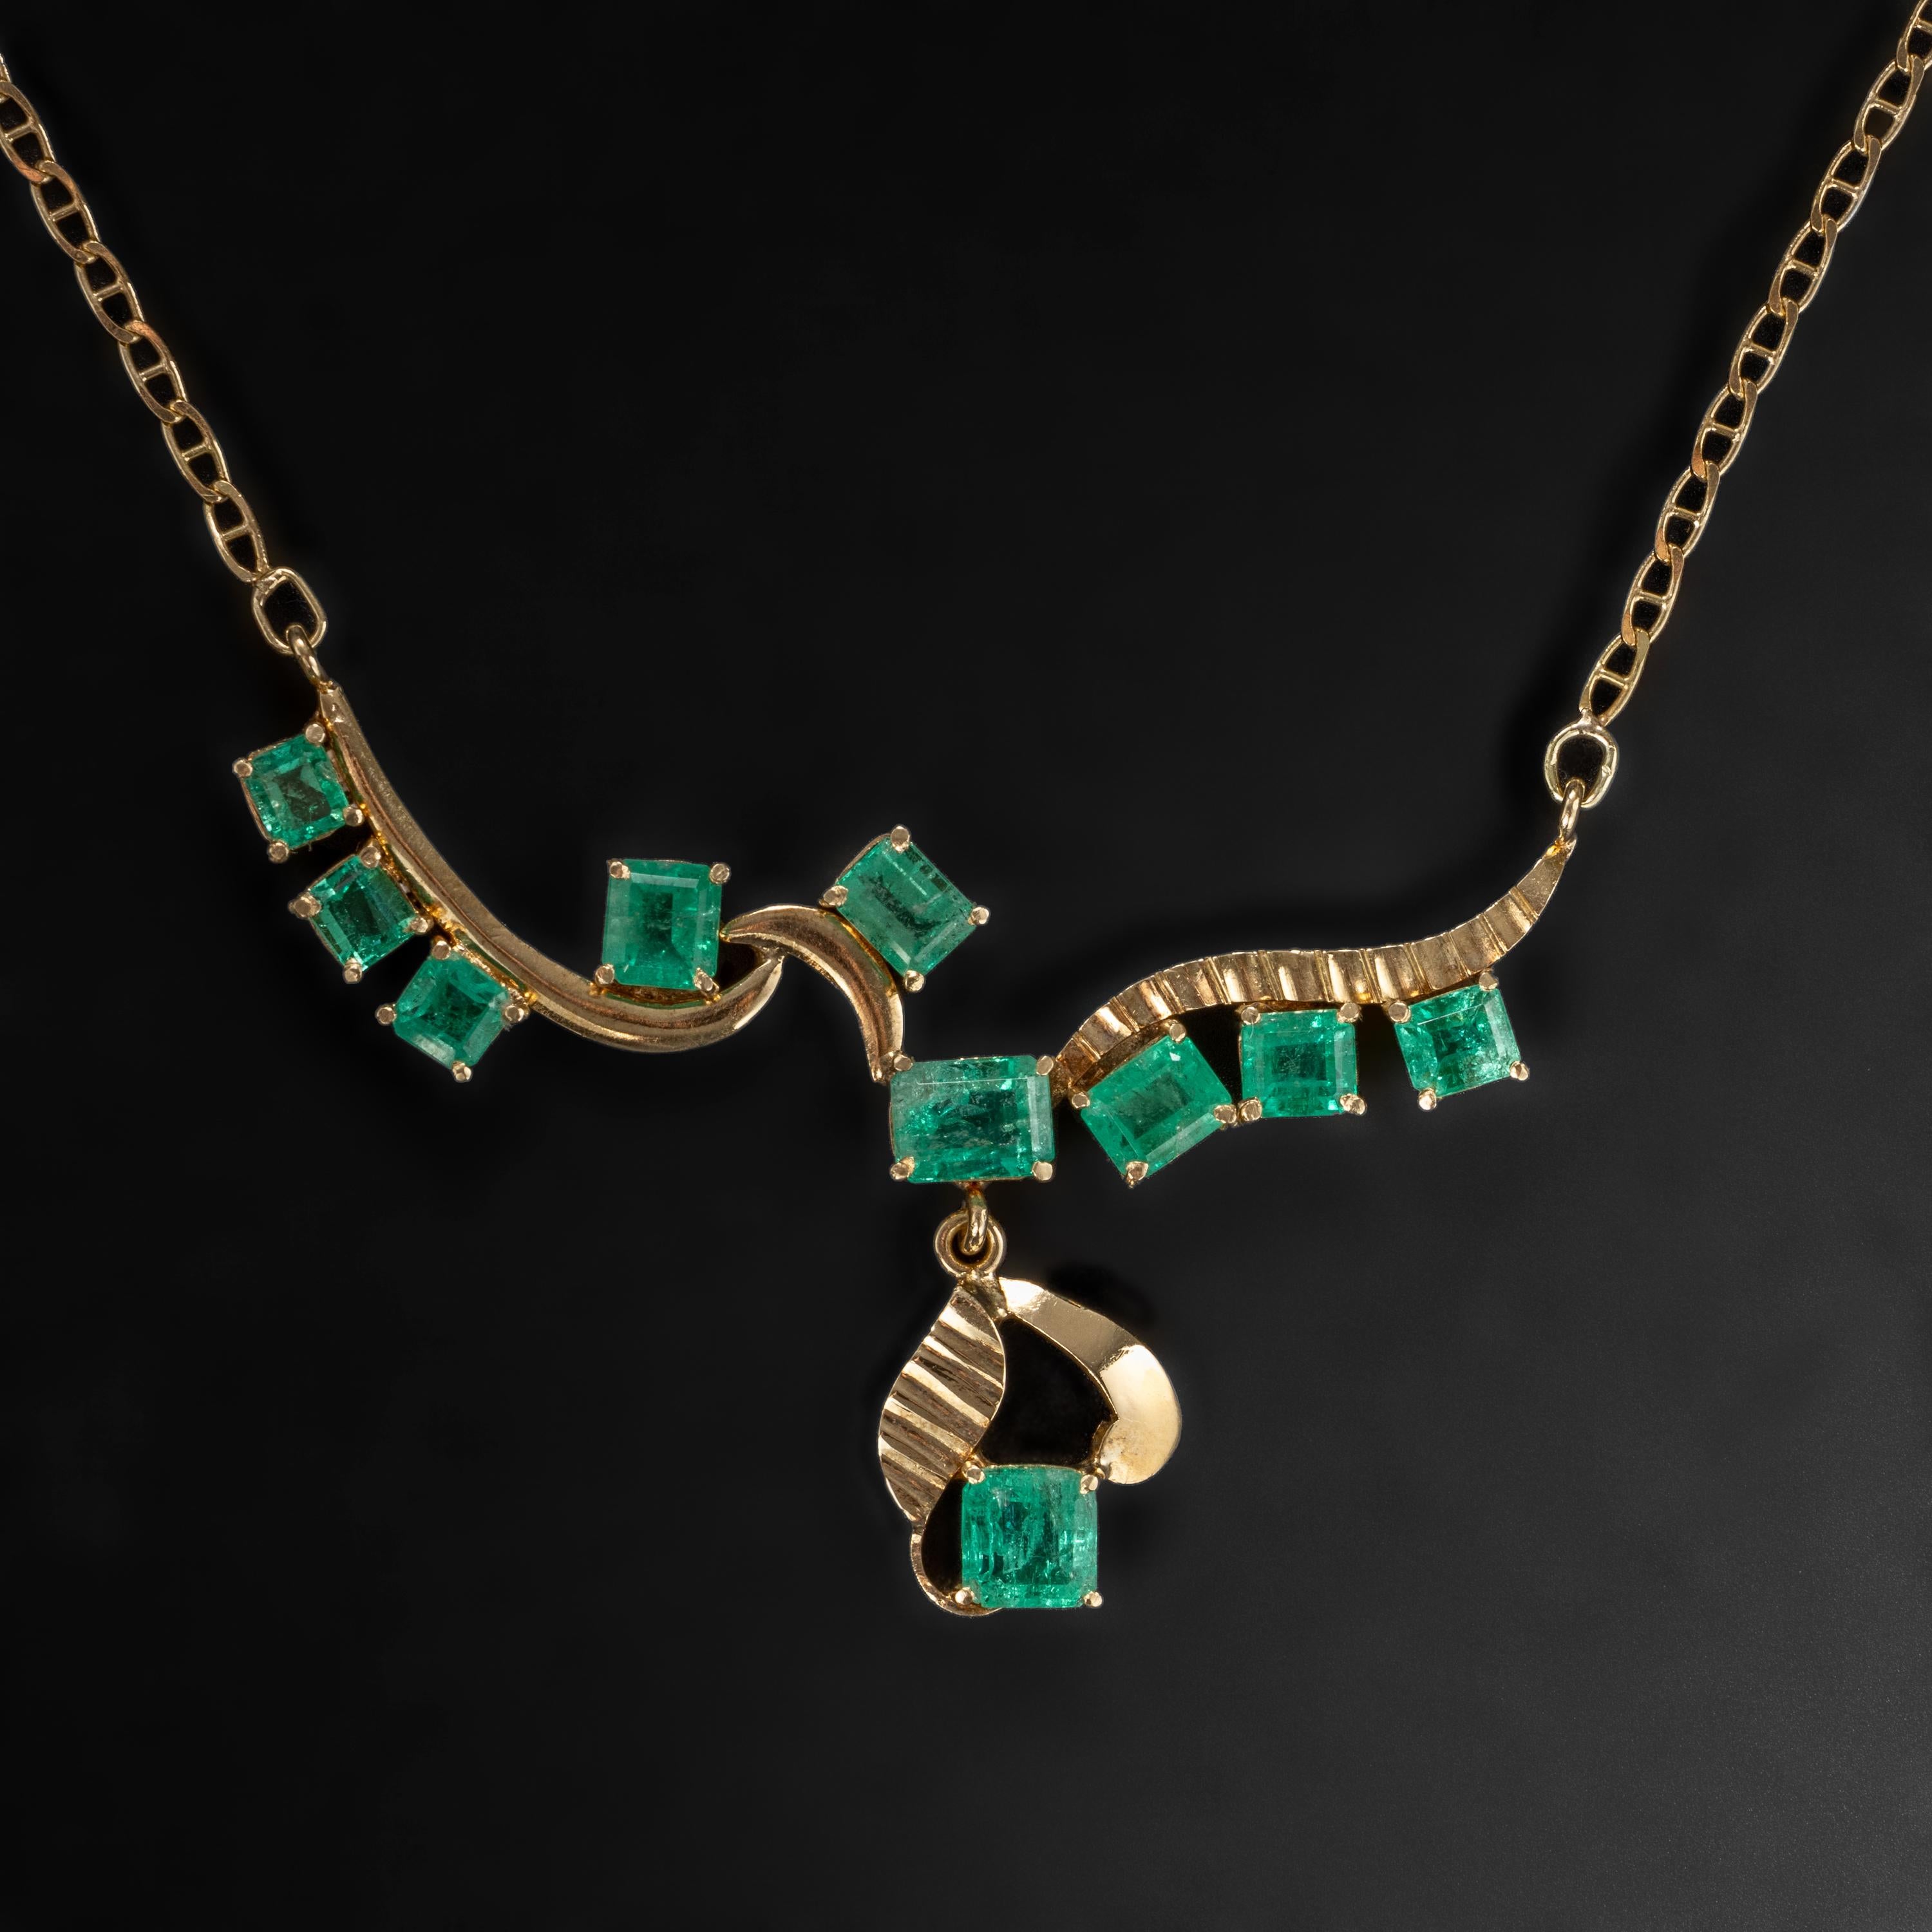 This 4.32-carat Colombian emerald necklace was purchased by a small-town jeweler in the 1980s. He then placed it in his safe and forgot about it for the next few decades. So although it dates to approximately 1982, it has never been worn and is in